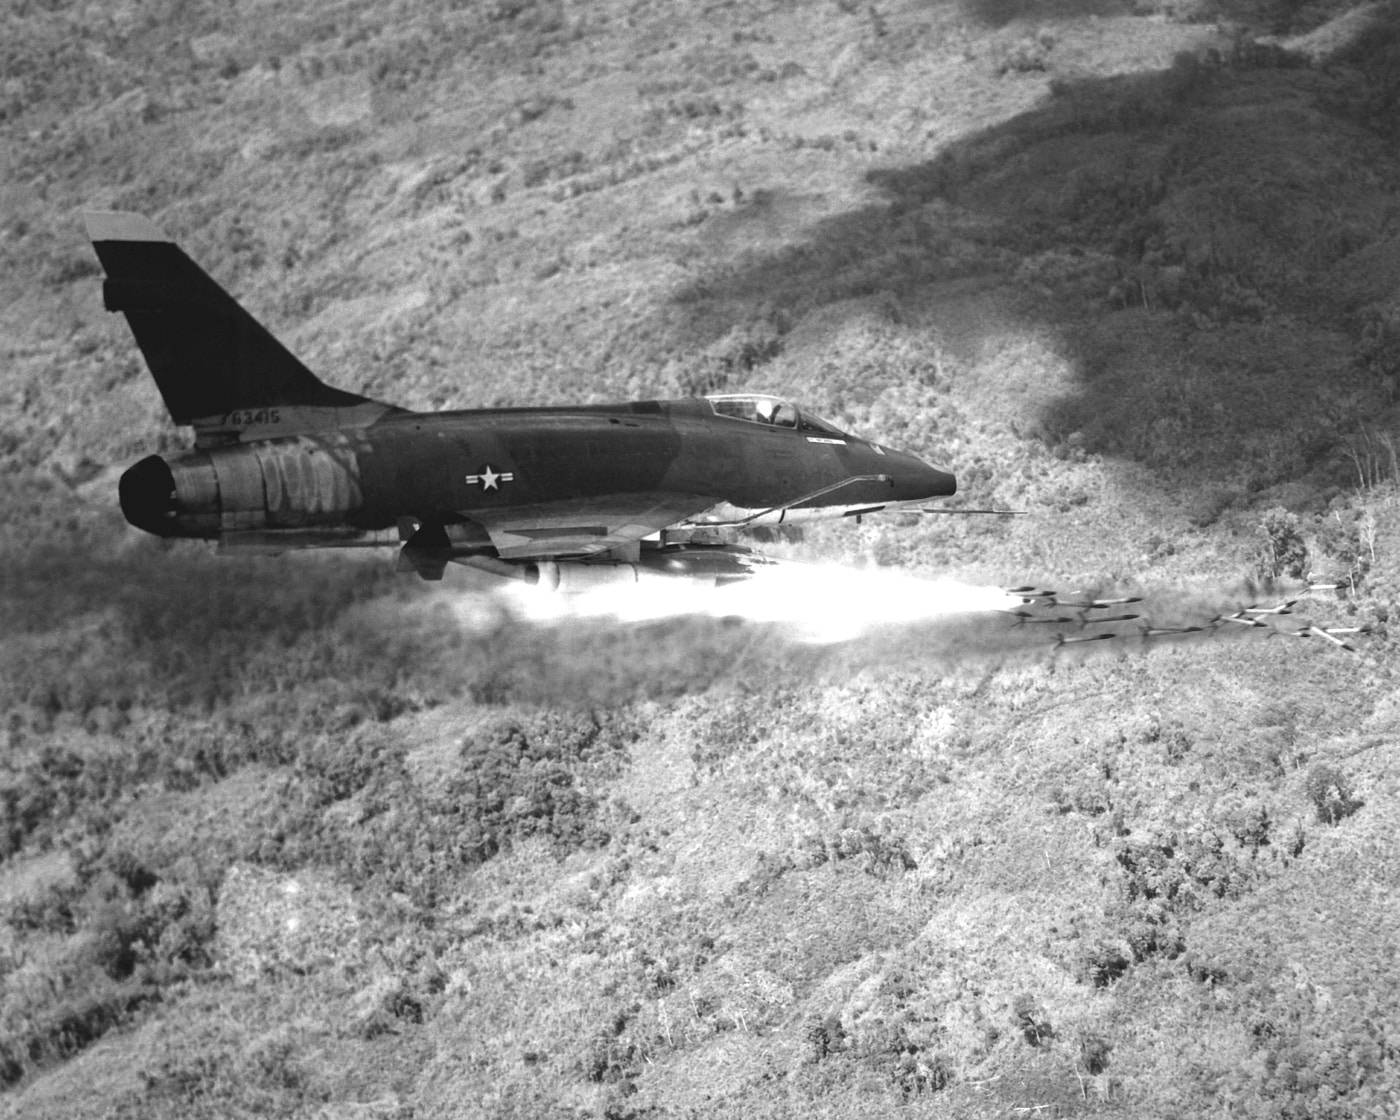 f-100d super sabre launches rockets at nva and vc in south vietnam strafing attack